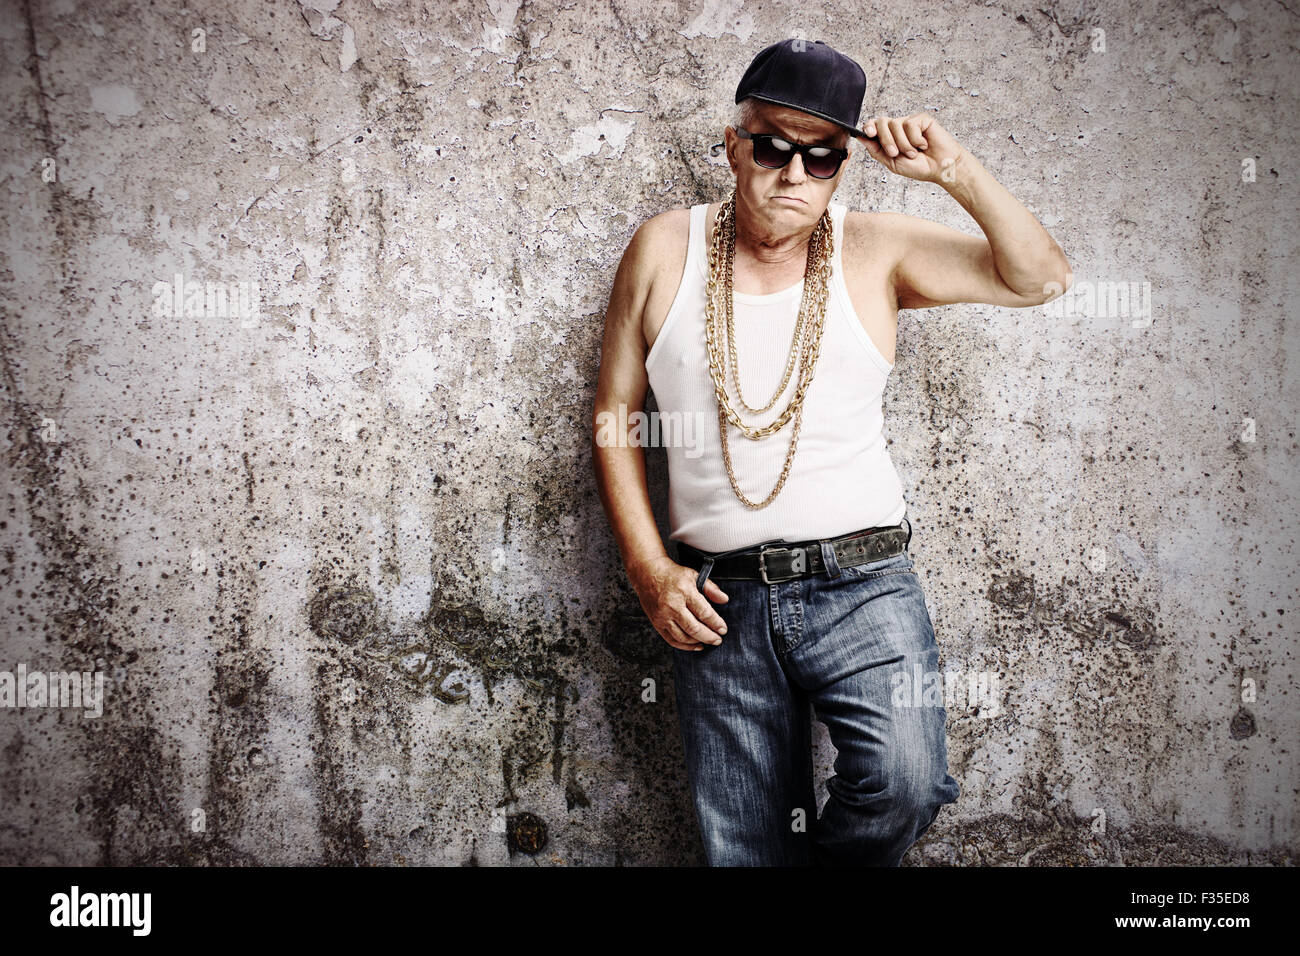 Senior gangster in hip hop outfit leaning against a rusty gray wall and looking at the camera Stock Photo